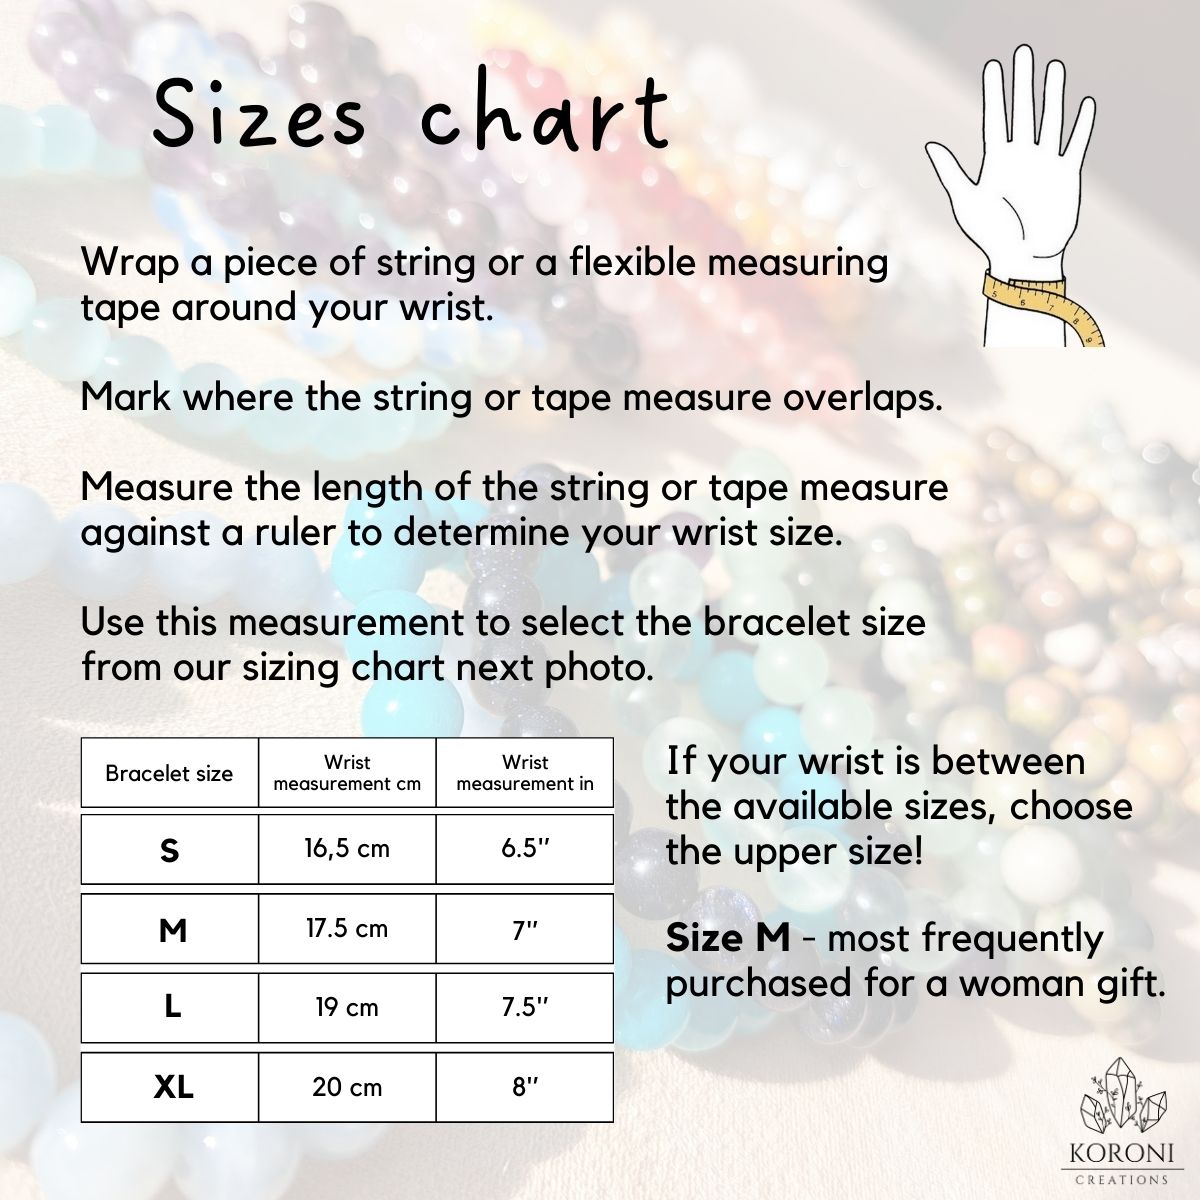 Bracelet sizes chart and explanation how to measure your wrist size.